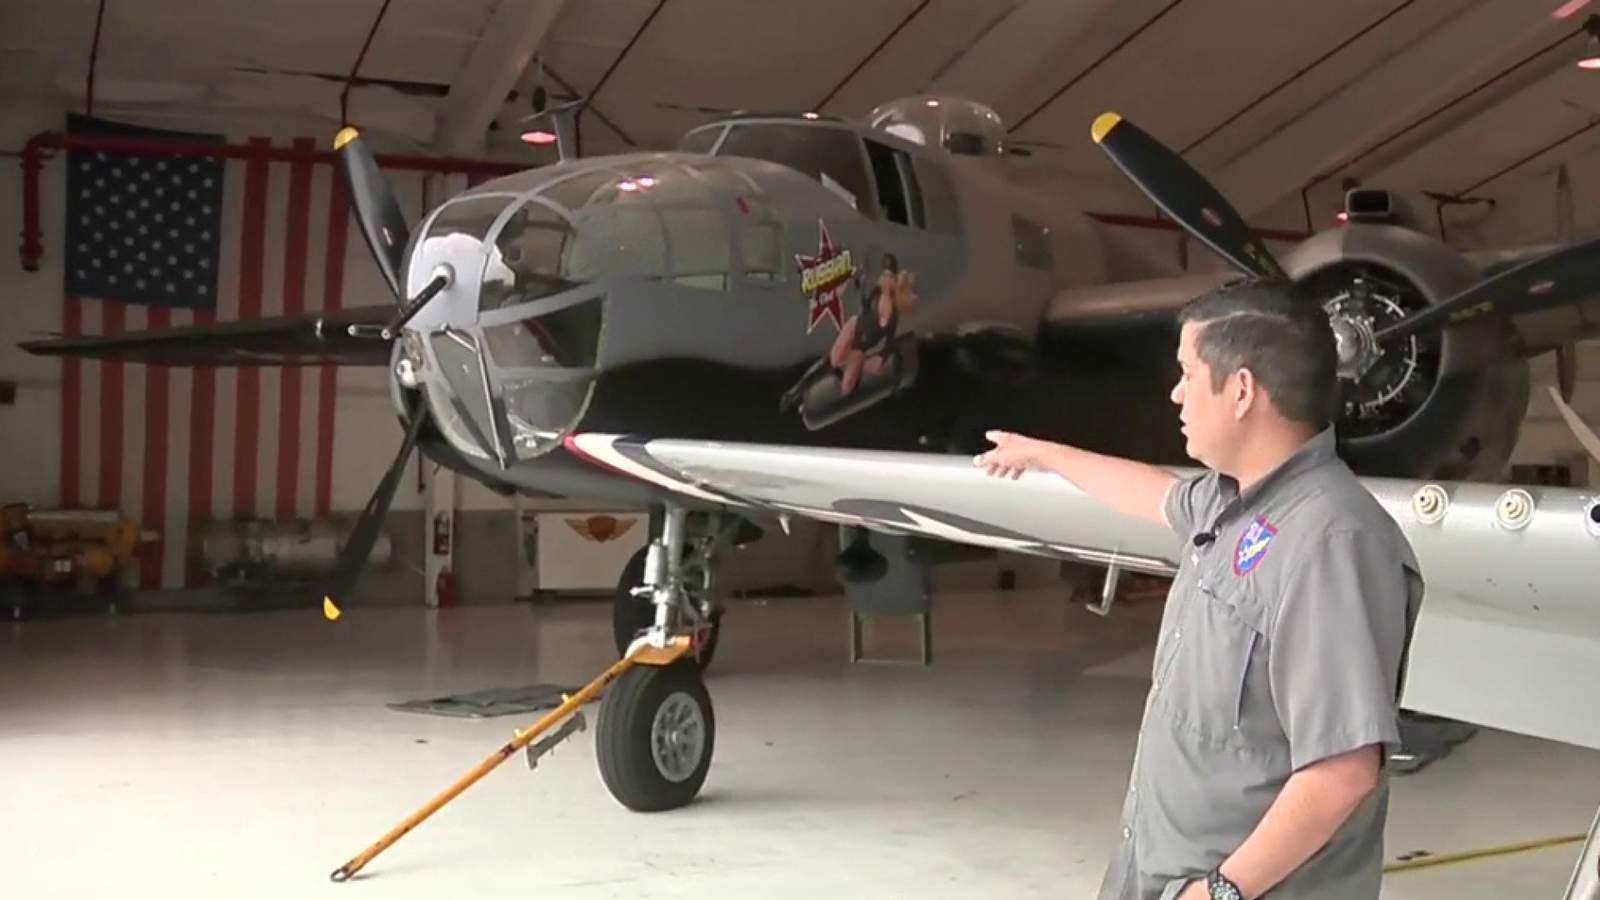 World War II-era aircraft flyover in San Antonio: What to expect